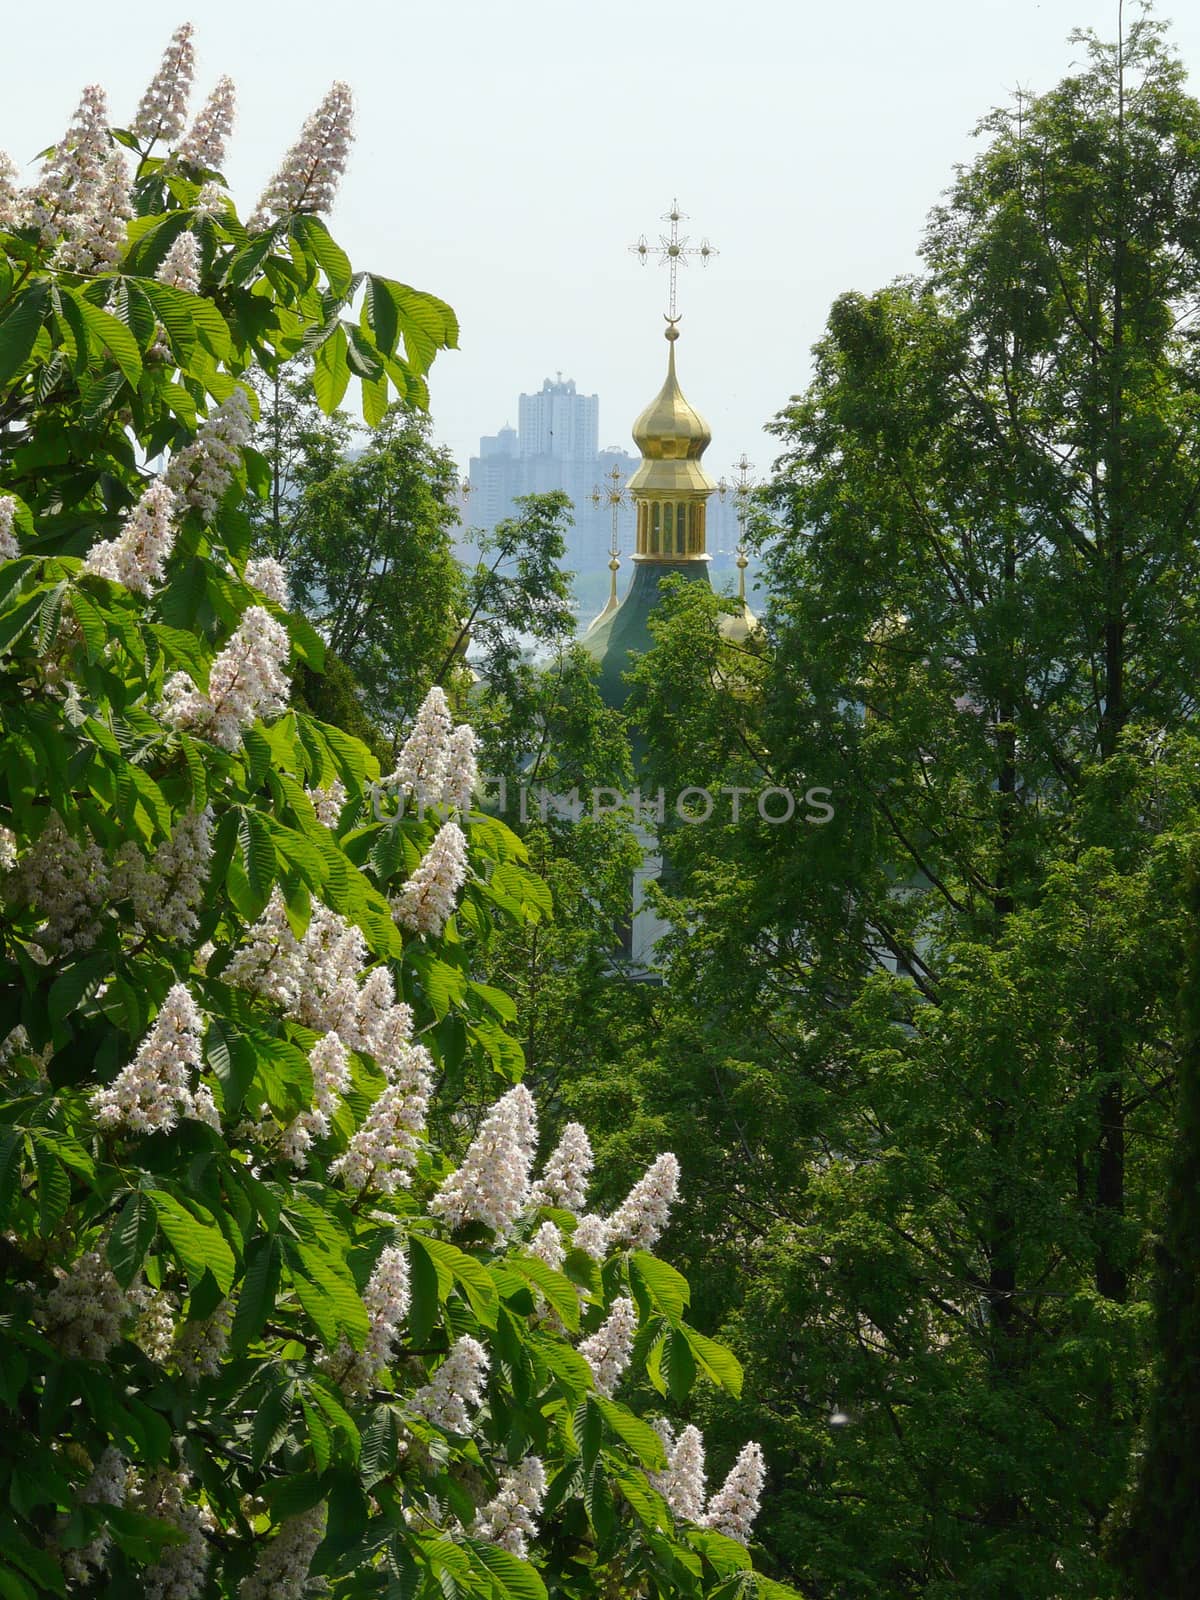 A beautiful chestnut tree with white candles growing up with a gilded dome of the church behind it and contours of multi-storey houses on the horizon.